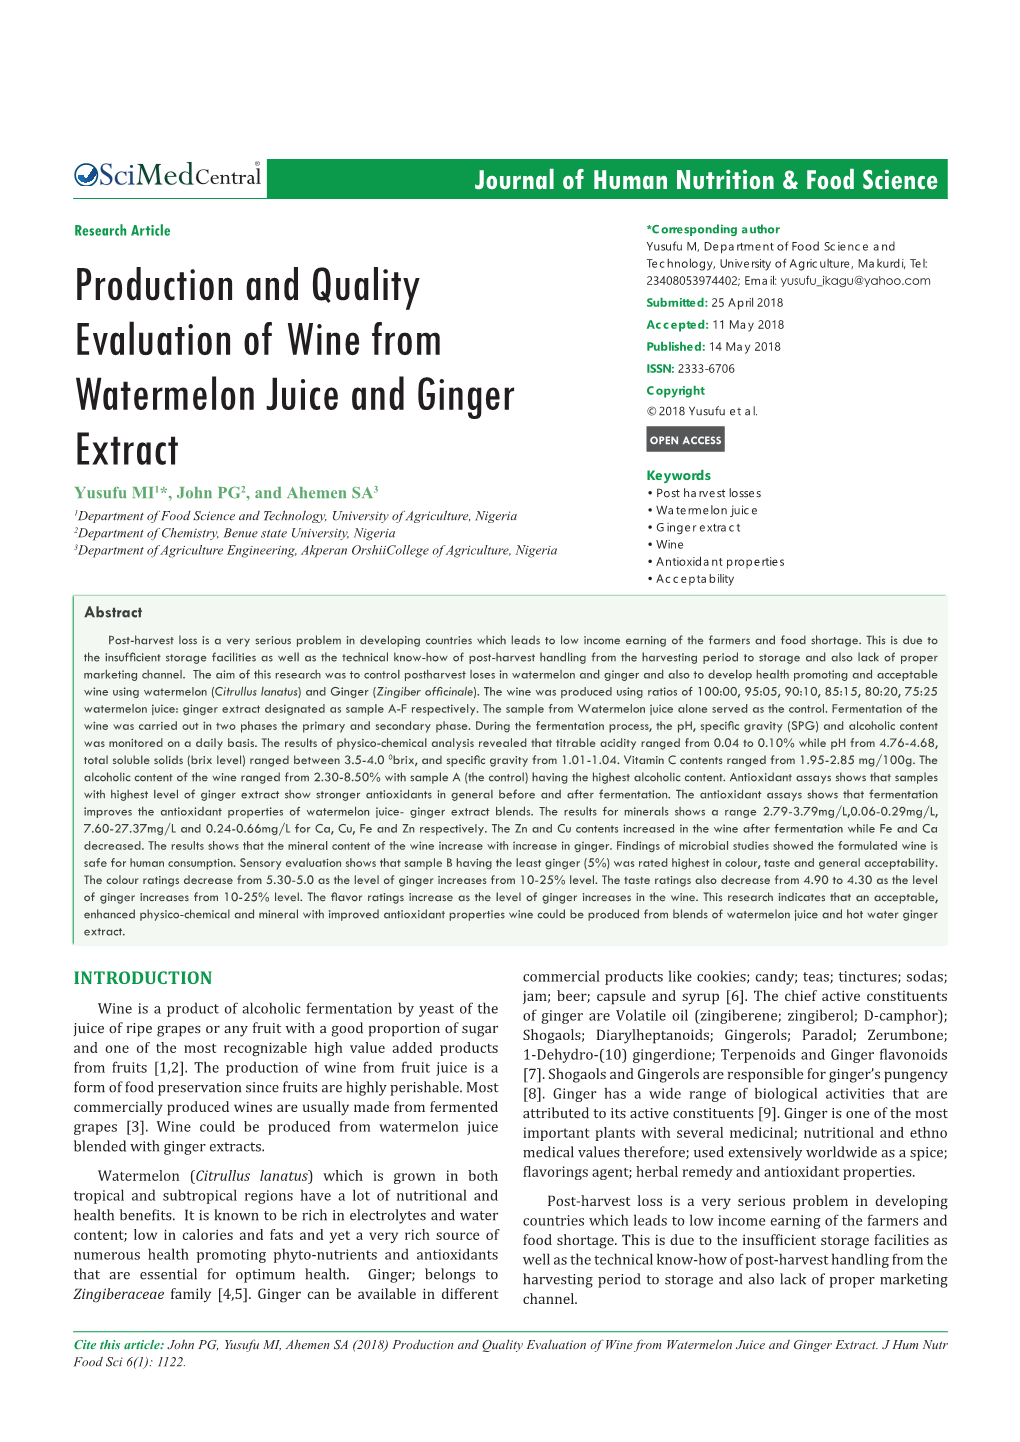 Production and Quality Evaluation of Wine from Watermelon Juice and Ginger Extract